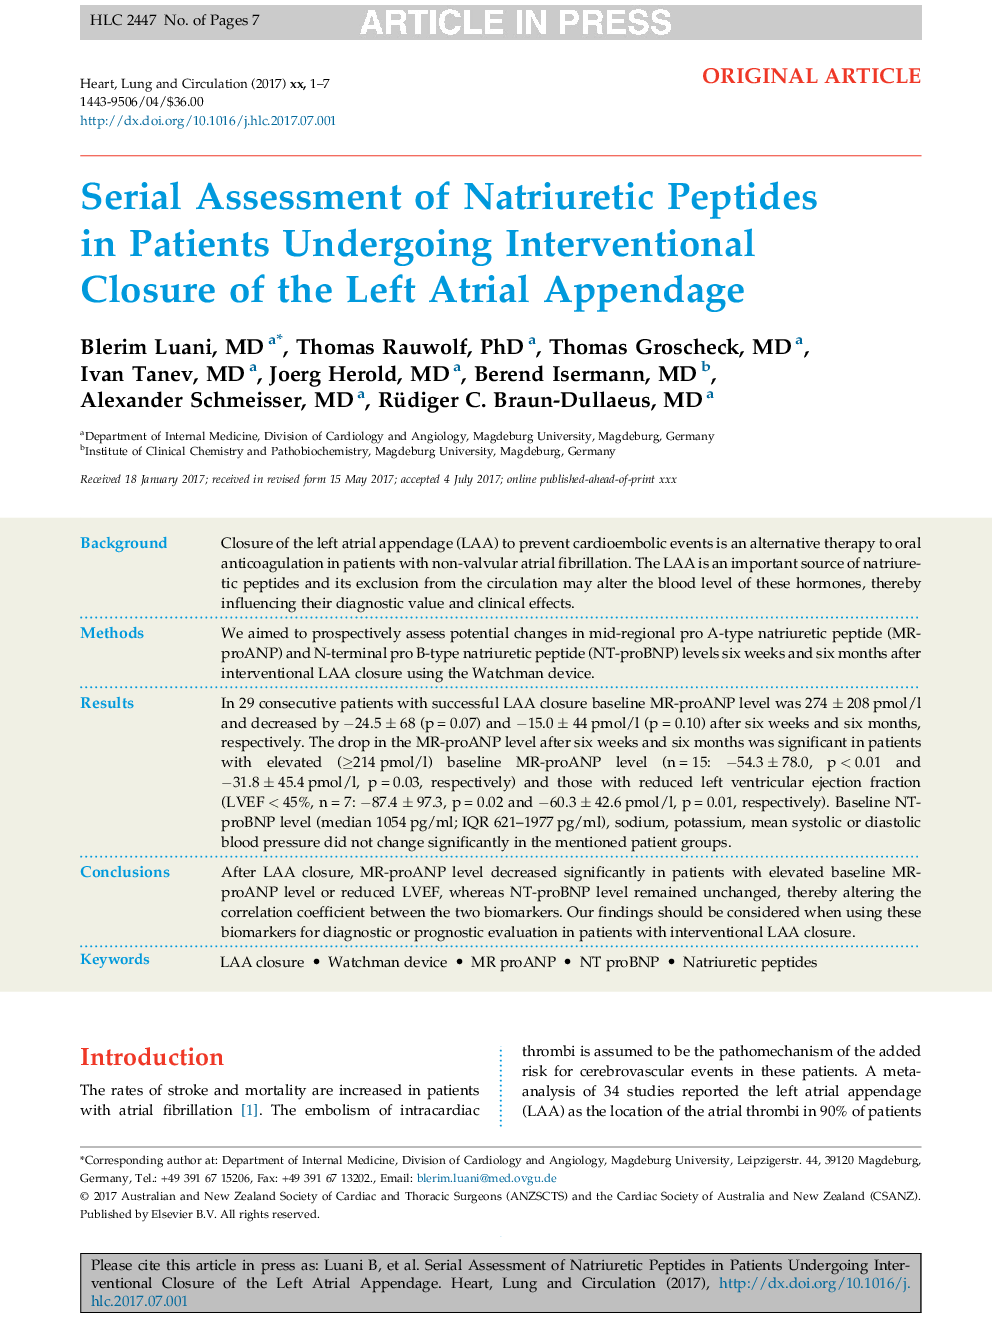 Serial Assessment of Natriuretic Peptides in Patients Undergoing Interventional Closure of the Left Atrial Appendage